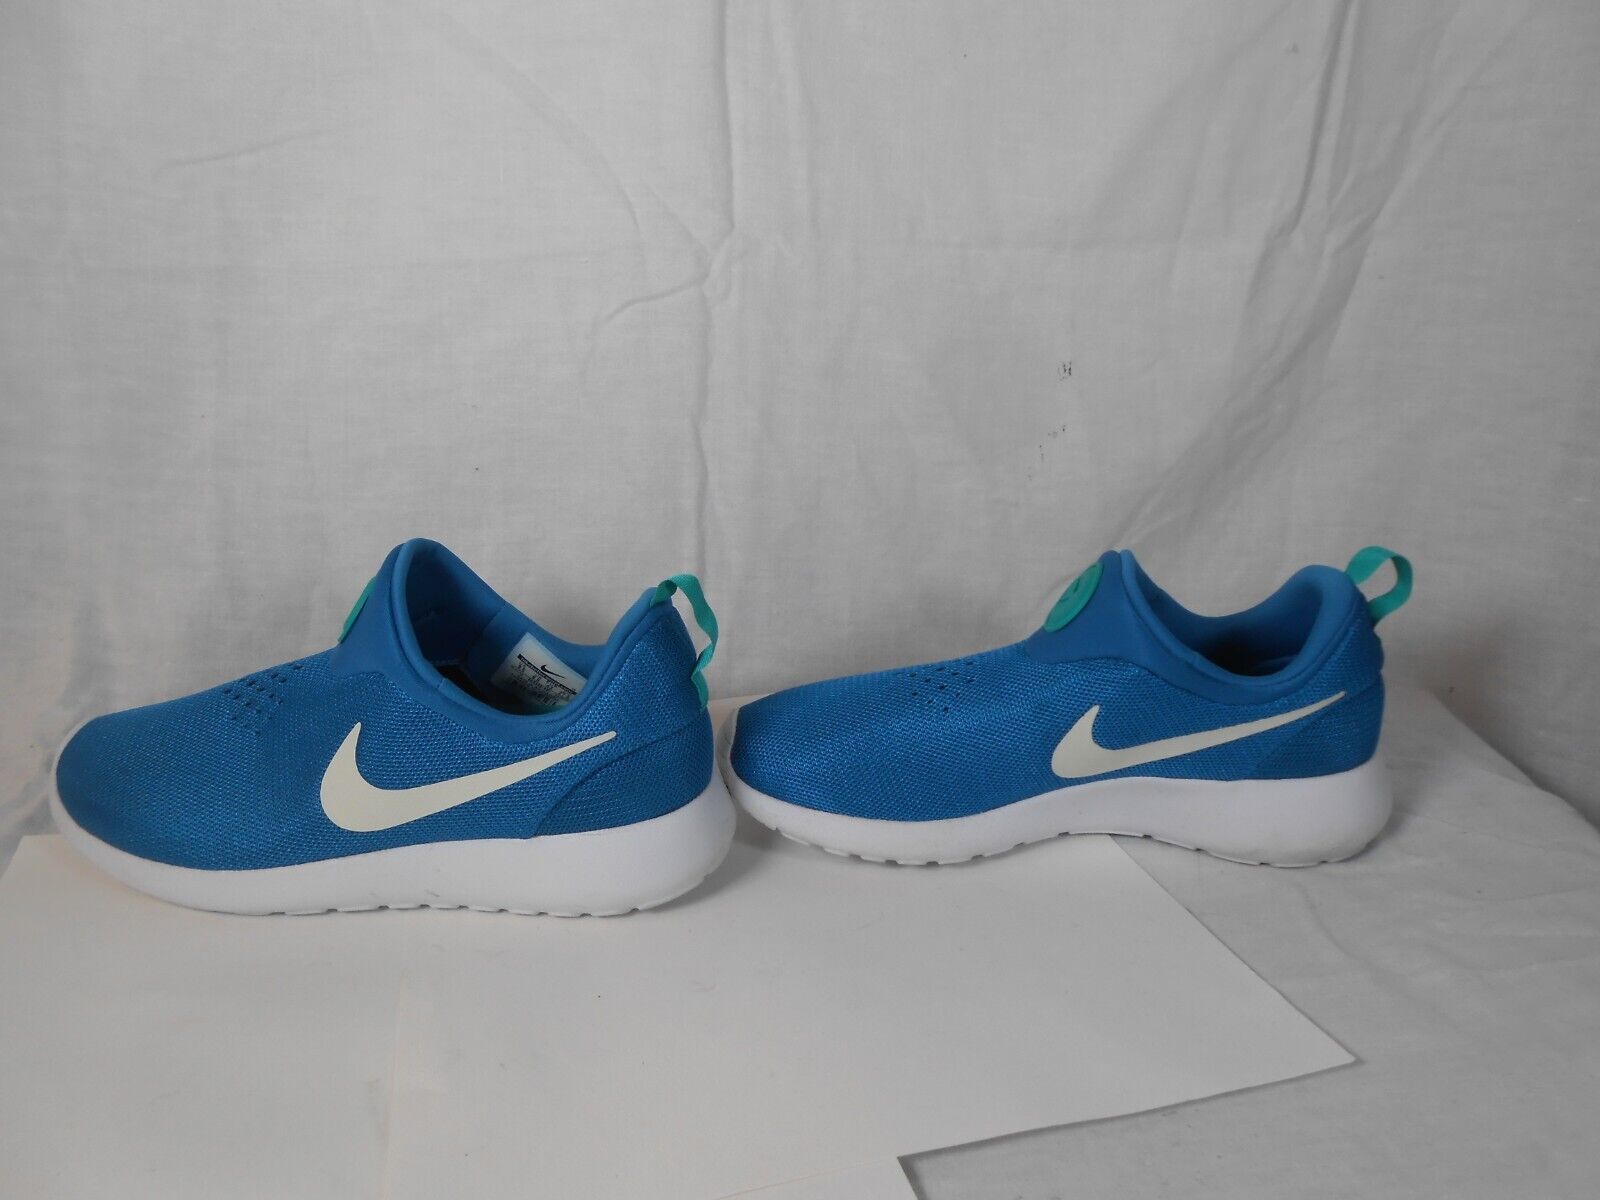 Primary image for NIKE MENS SLIP ONS BLUE 644432 401 SIZE 9.5